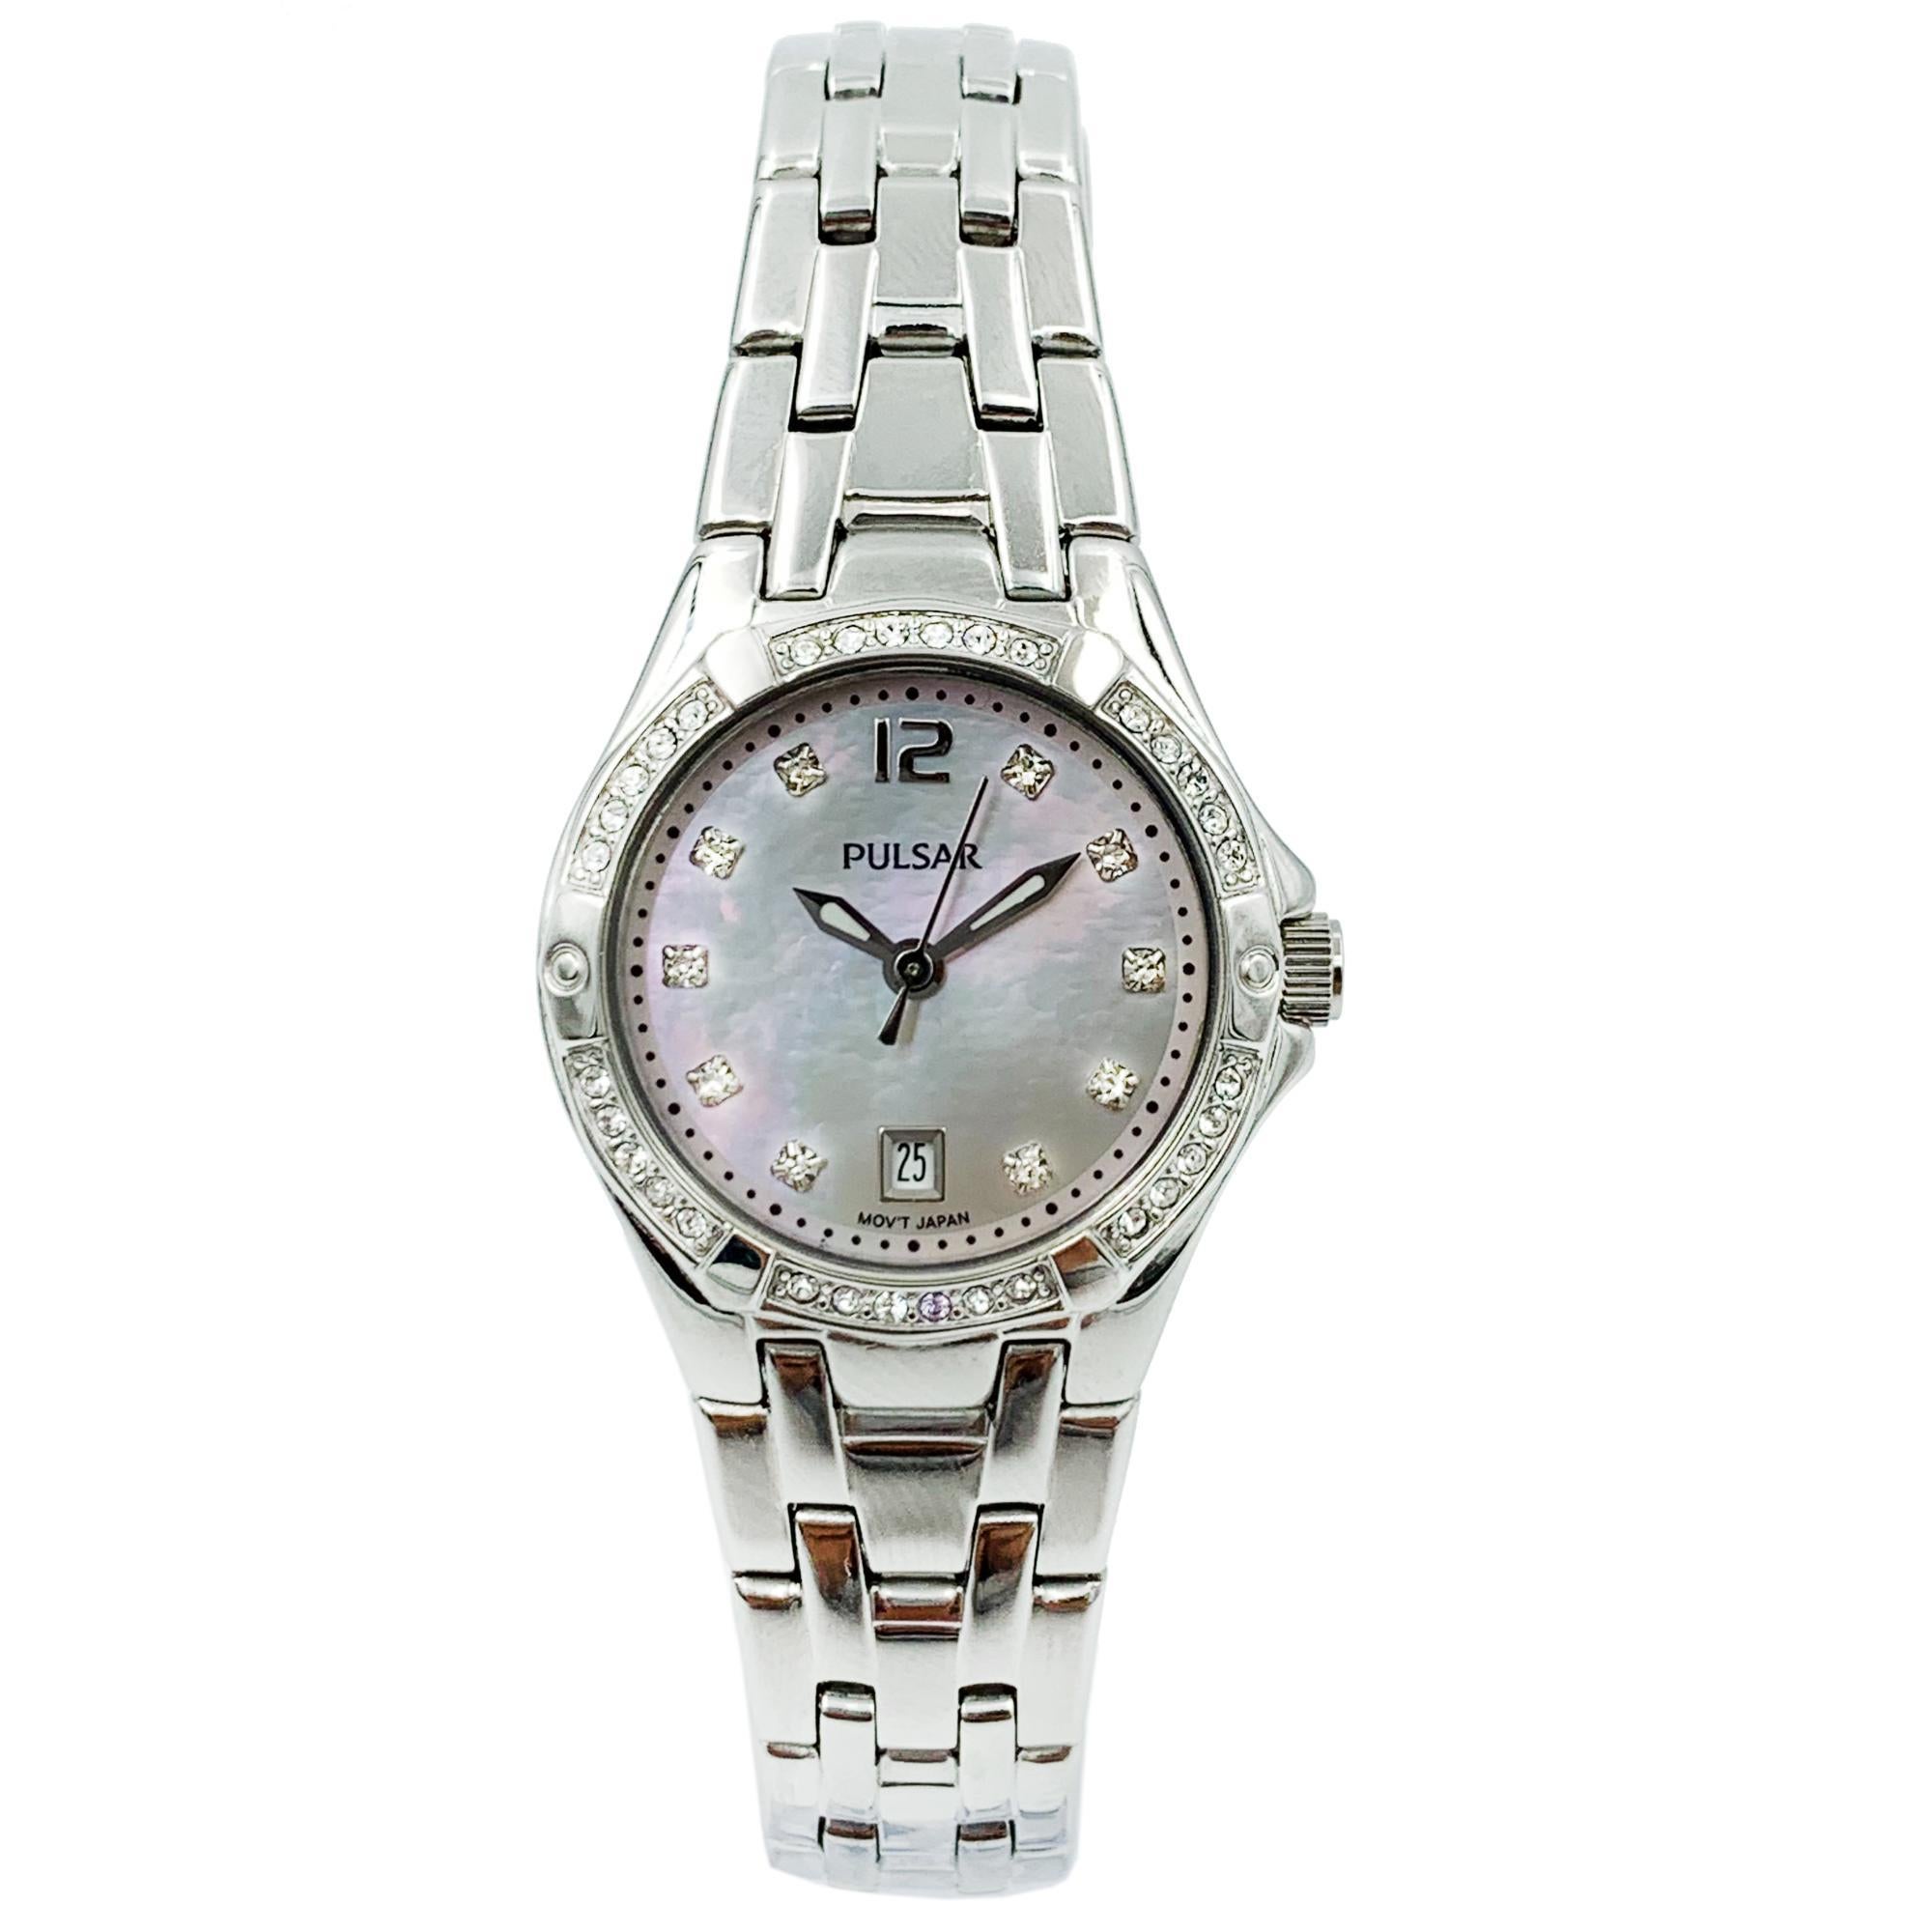 Display Model Pulsar Swarovski Crystal Steel MOP Dial Quartz Ladies Watch With Necklace PXT913. This Beautiful Timepiece is Powered by a Quartz (Battery) Movement and Features: Stainless Steel case and Bracelet, Fixed Stainless Steel Bezel Set with